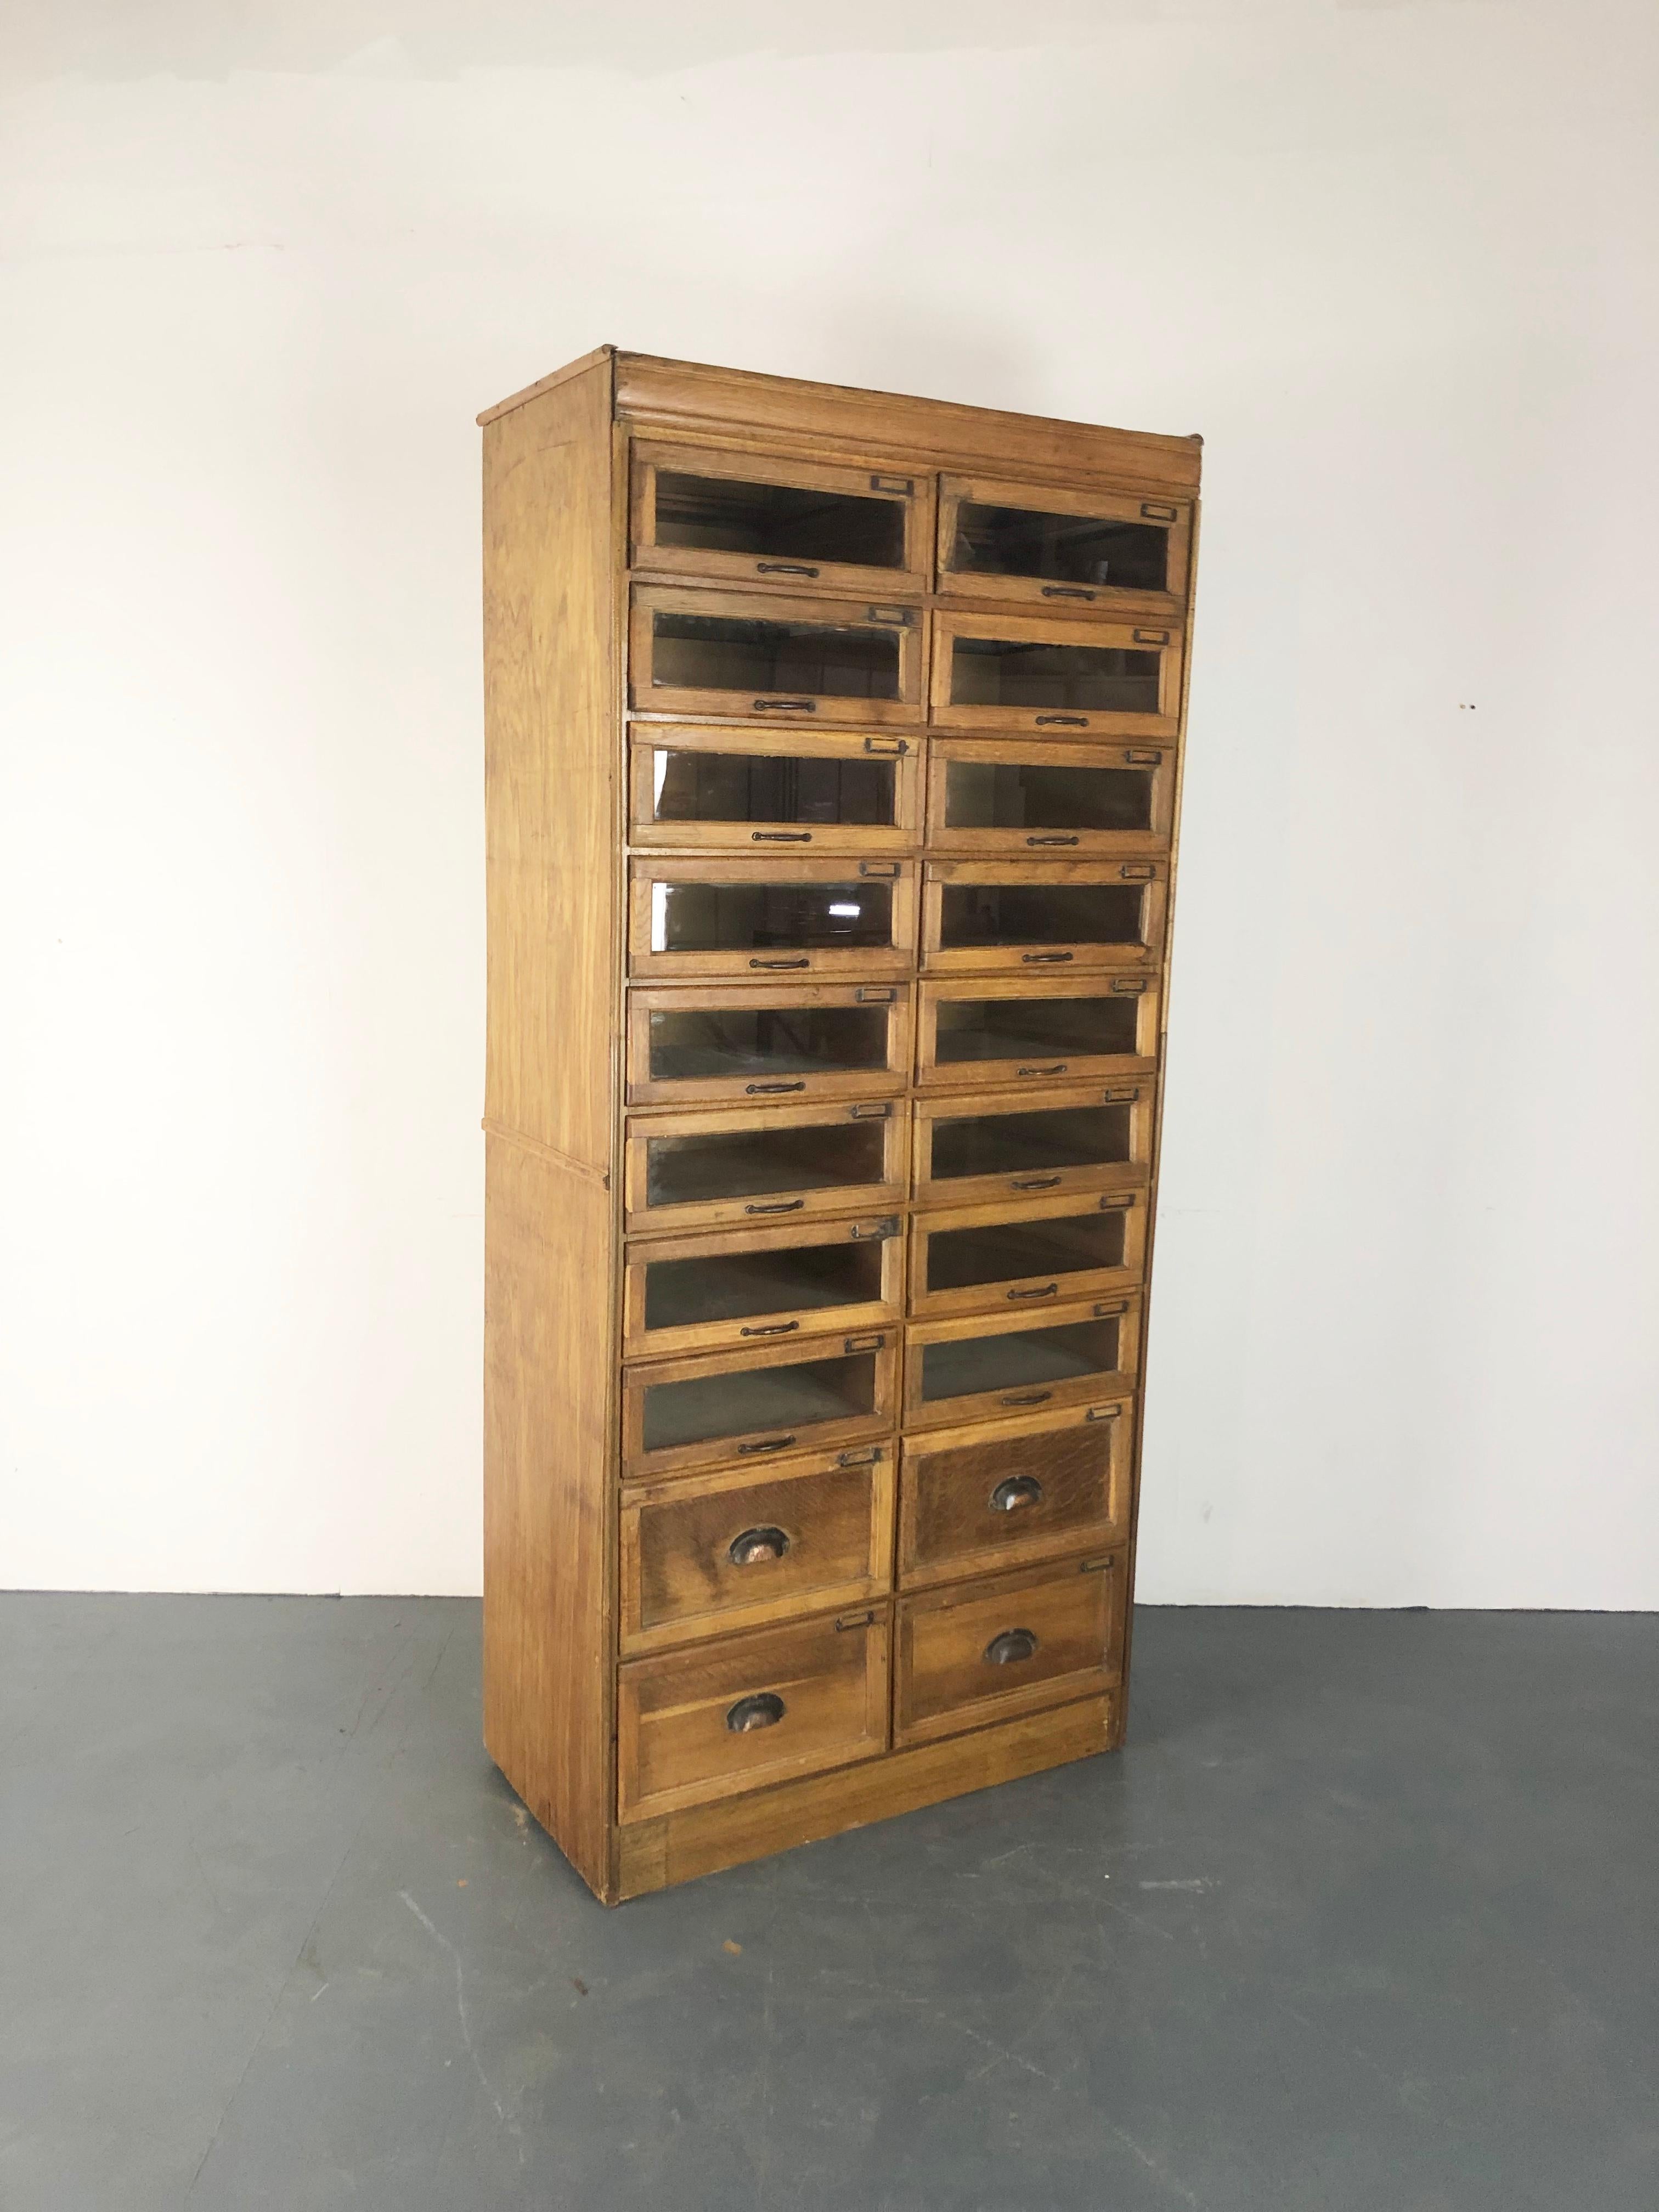 A very fine 20 drawer haberdashery shop cabinet from the first part of the 20th century.

It has 16 glass fronted drawers, all with brass handles and inserts, and four solid wooden base drawers. 

Approximate dimensions:

Height: